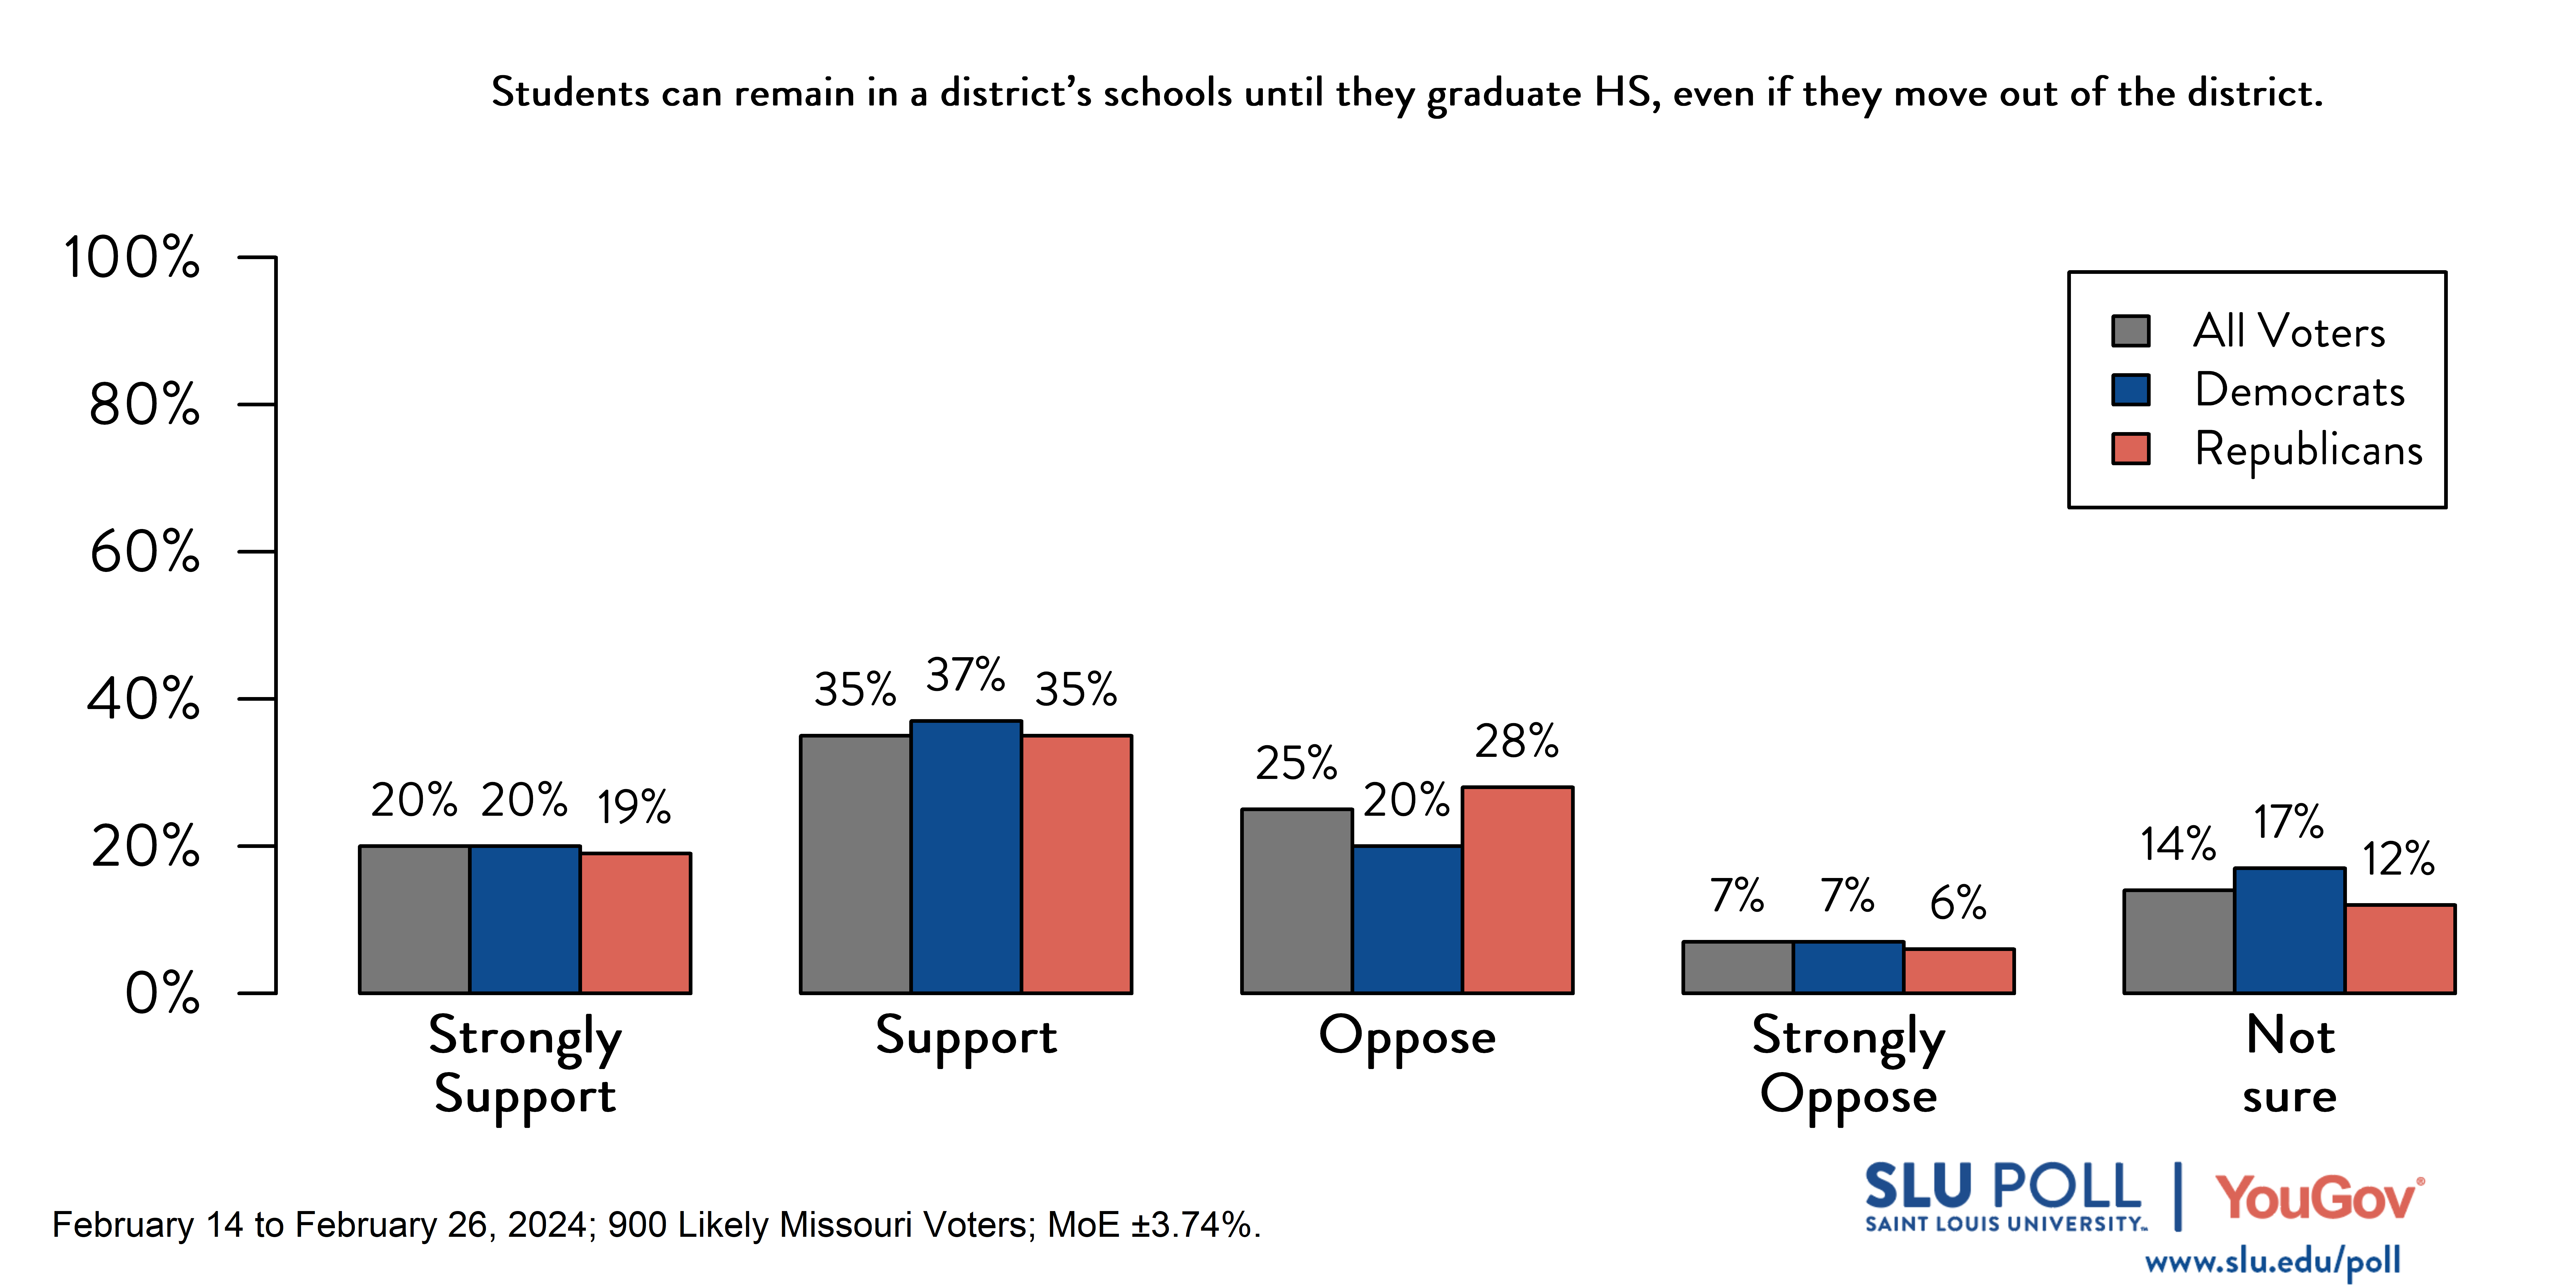 Likely voters' responses to 'Do you support or oppose the following policies…Allow students enrolled in a district's schools to remain in that district's schools until they graduate high school, even if they move out of the district?': 20% Strongly support, 35% Support, 25% Oppose, 7% Strongly oppose, and 14% Not sure. Democratic voters' responses: ' 20% Strongly support, 37% Support, 20% Oppose, 7% Strongly oppose, and 17% Not sure. Republican voters' responses:  19% Strongly support, 35% Support, 28% Oppose, 6% Strongly oppose, and 12% Not sure.